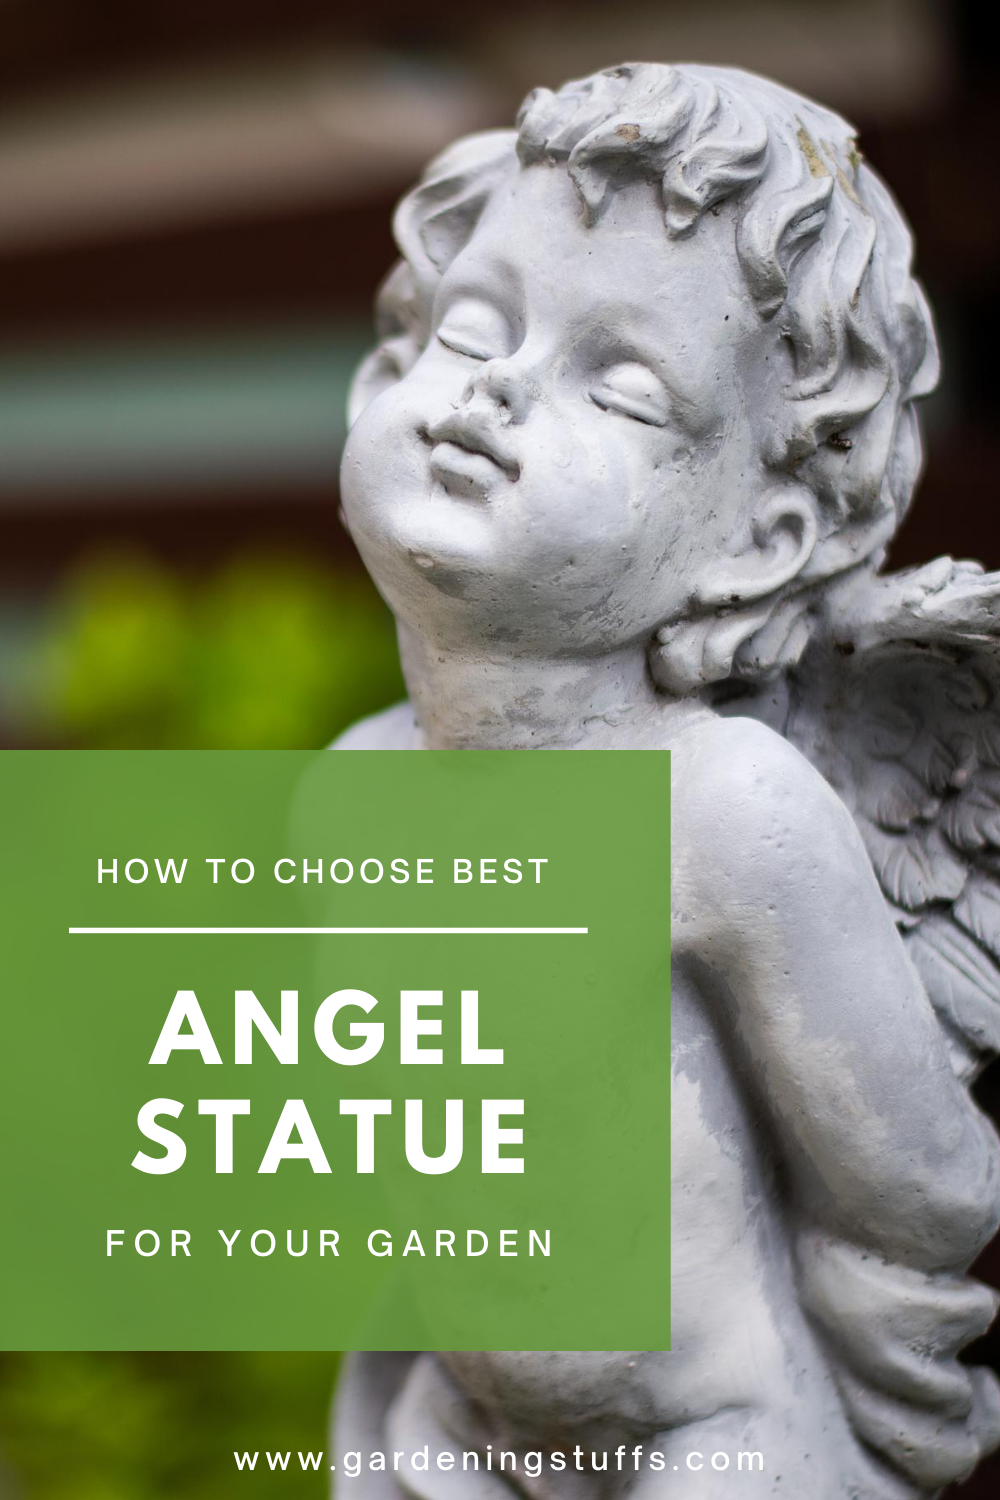 If you’re leaning for victorian garden and landscaping design, guardian angel statues and cherubs are without a doubt an excellent choice of decoration.There are multiple options you can find in the online market. We’ve listed down the factors to consider to help you choose the best garden angel statue for your home.